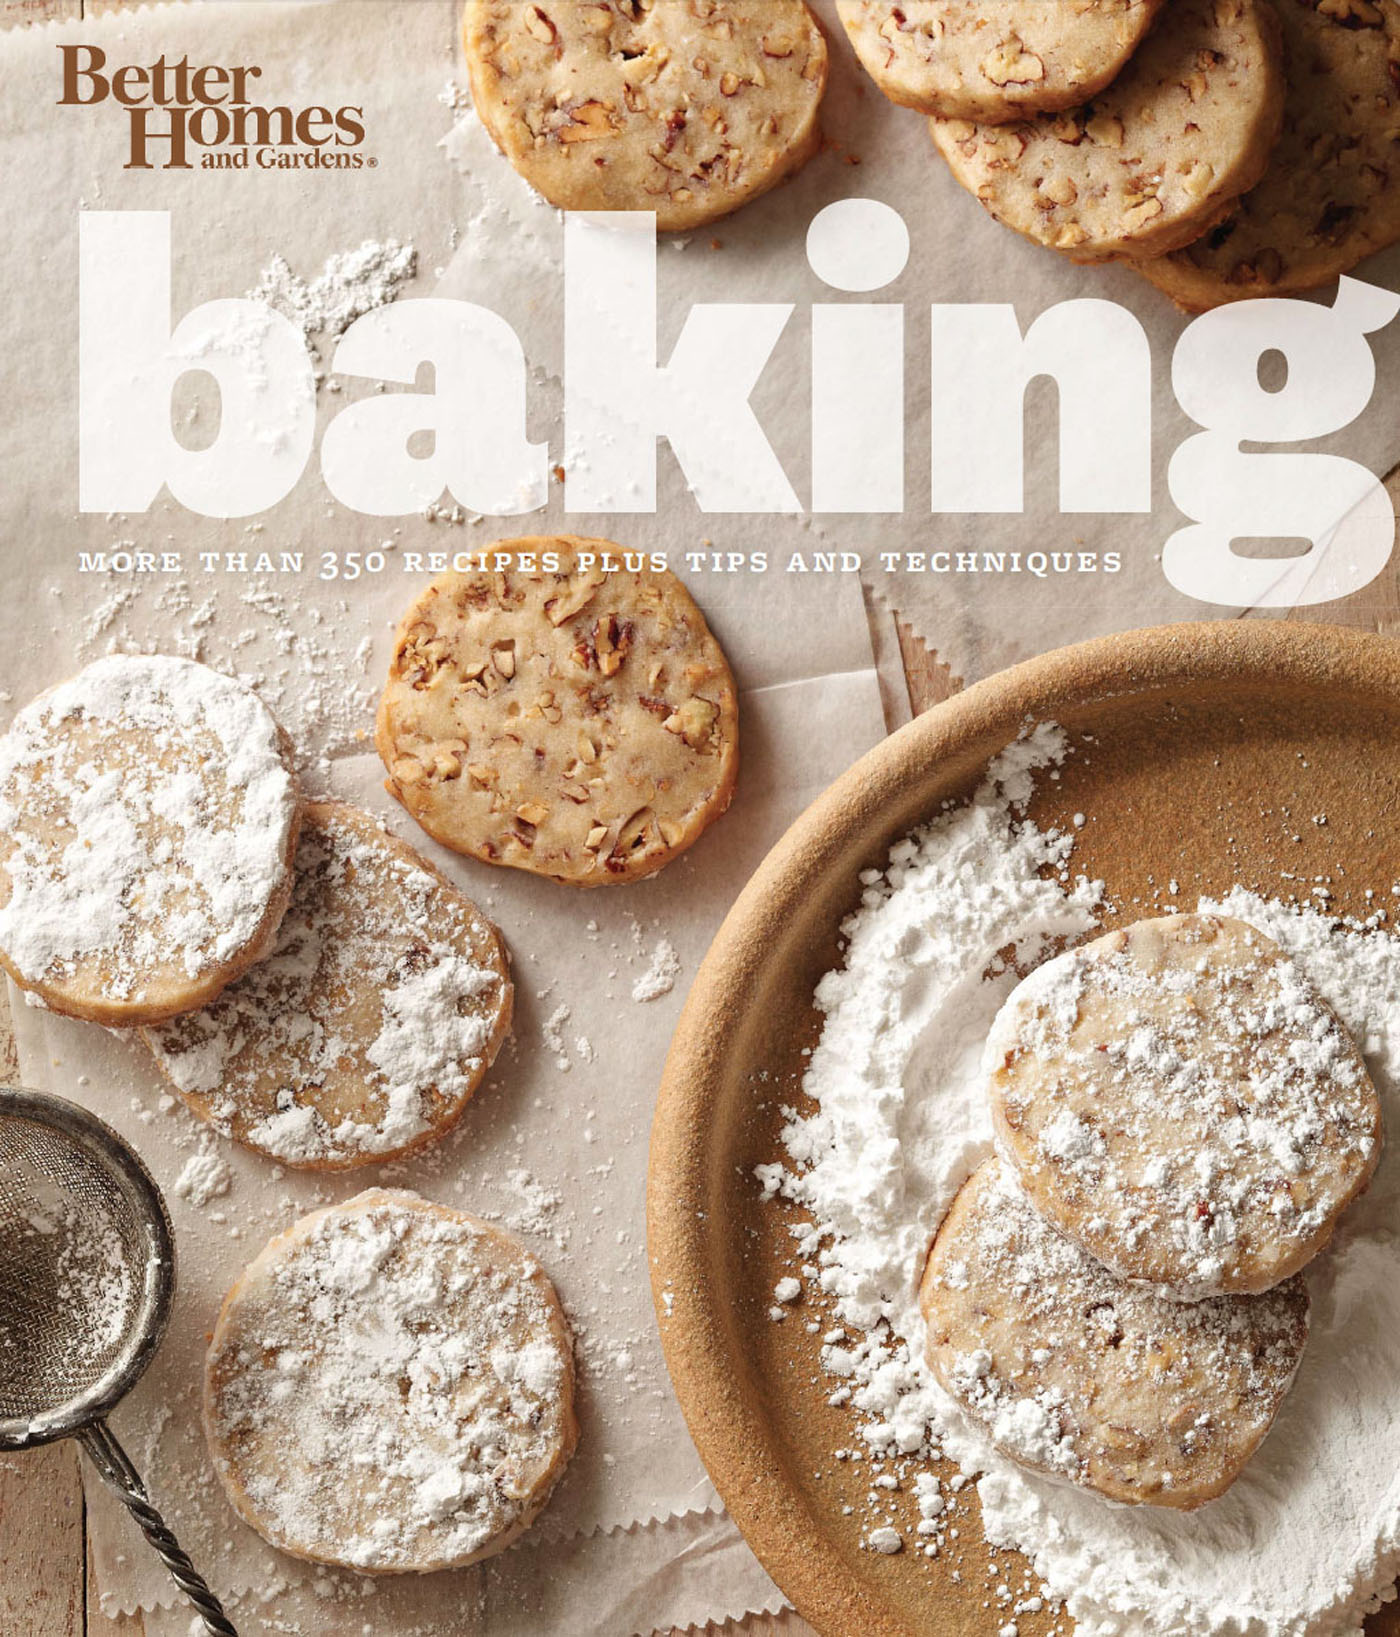 Umschlagbild für Better Homes and Gardens Baking [electronic resource] : More than 350 Recipes Plus Tips and Techniques